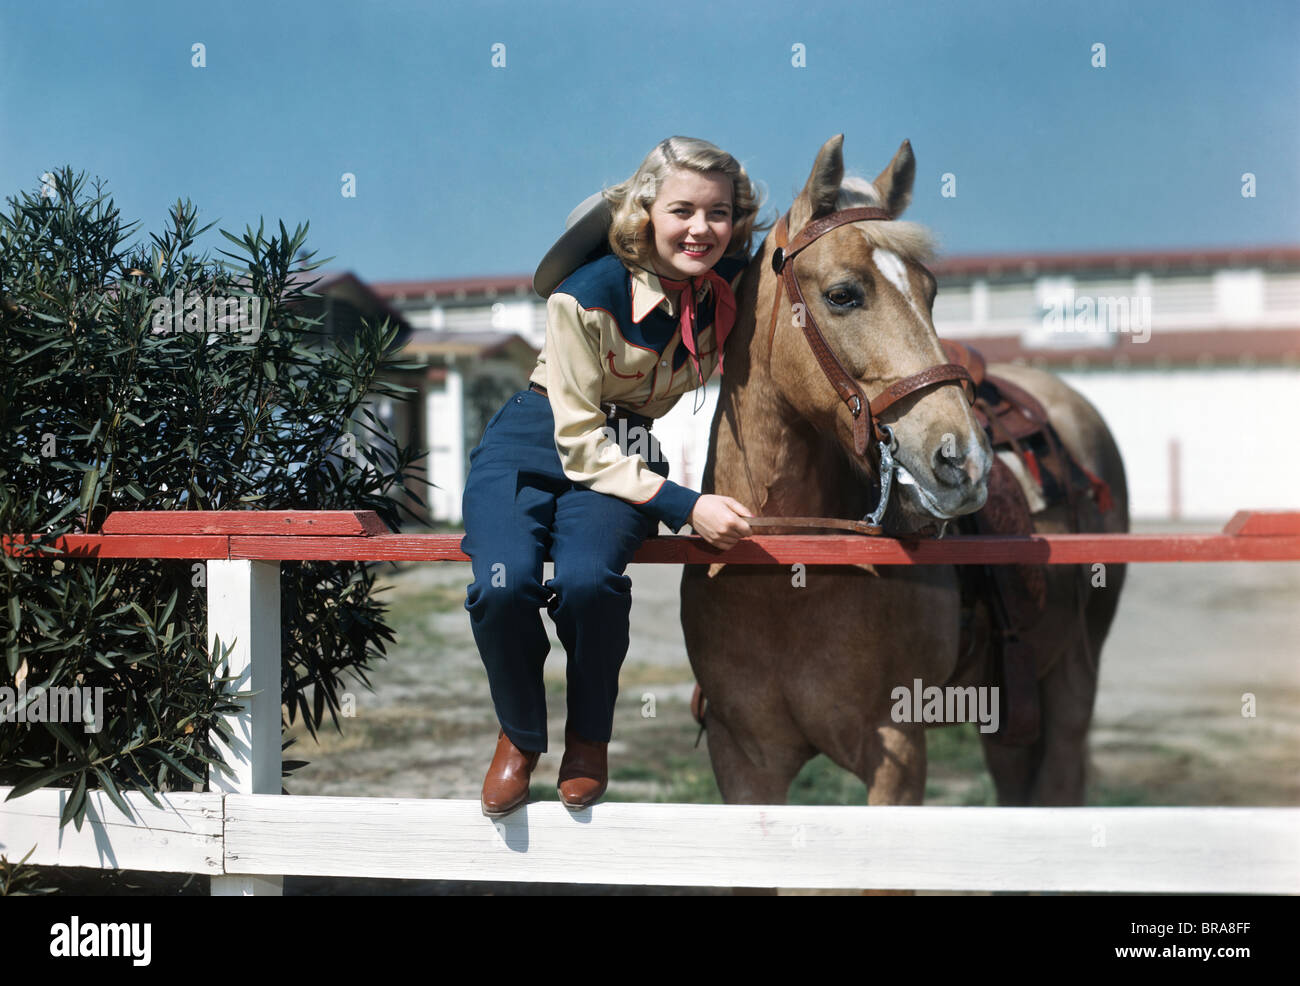 Années 1940 Années 1950 SMILING TEEN GIRL WEARING WESTERN COWGIRL COSTUME SITTING ON FENCE POSANT À CHEVAL Banque D'Images